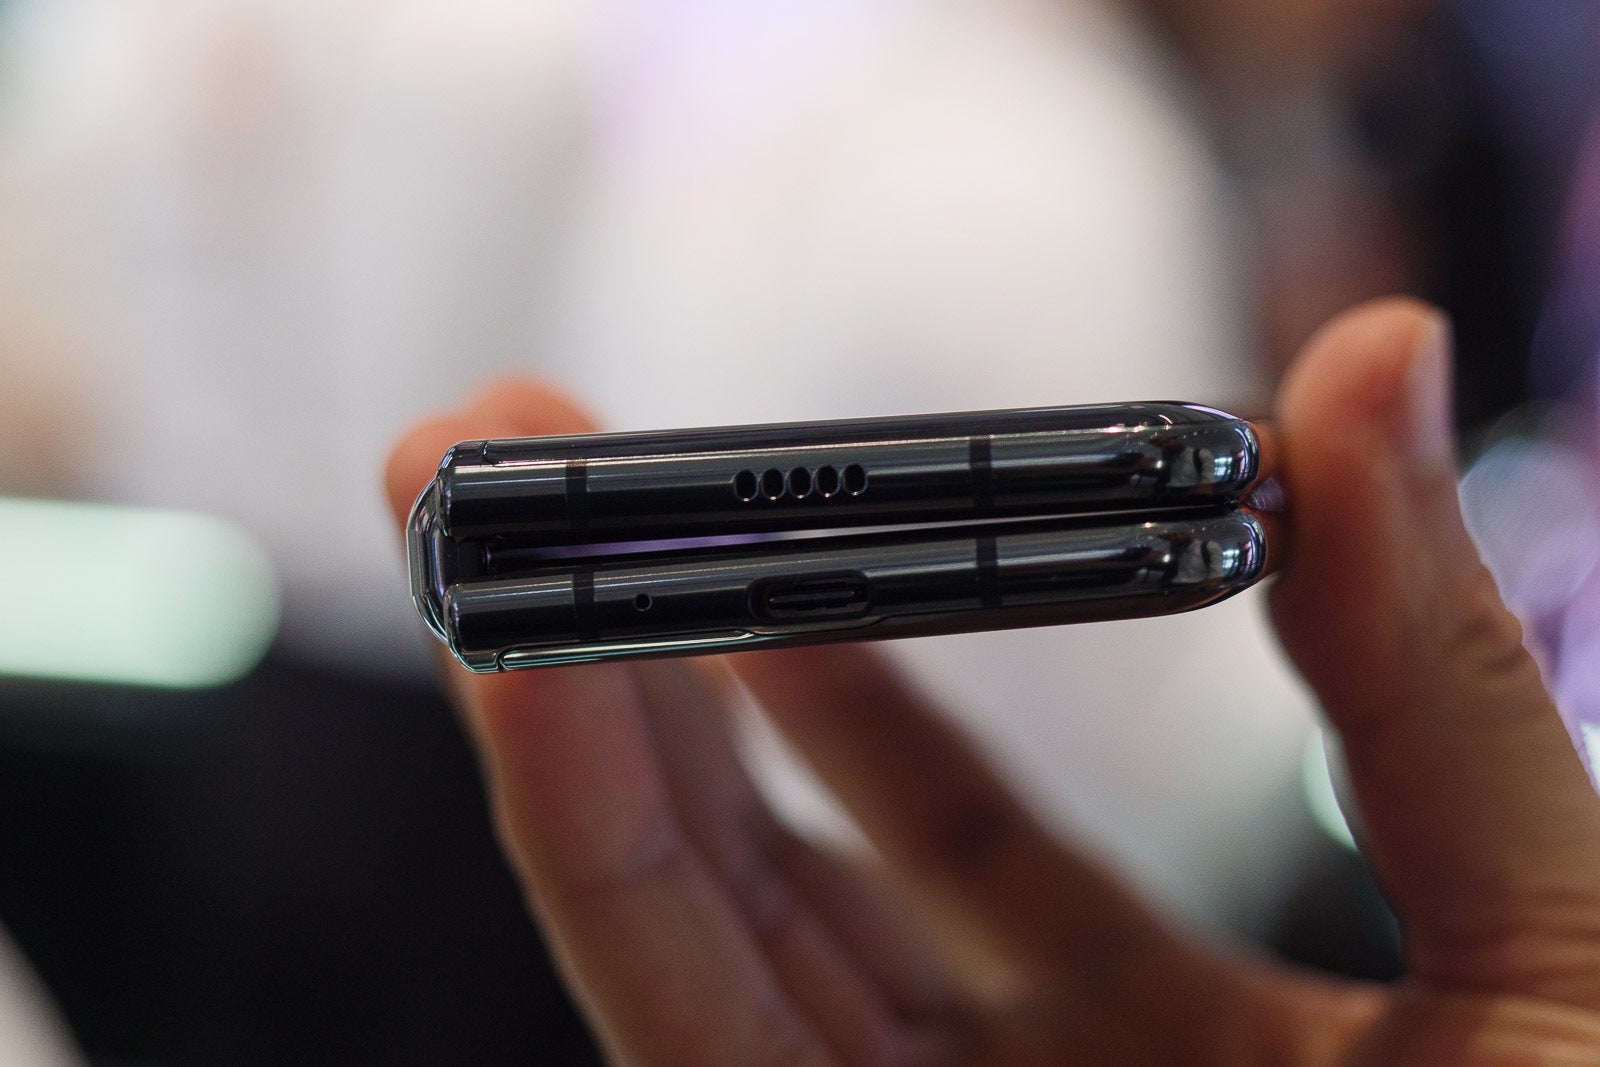 Slim is no the first word that comes to mind when seeing this - The FlexPai 2 makes me think the Galaxy Fold 2 will be awesome, here’s why...